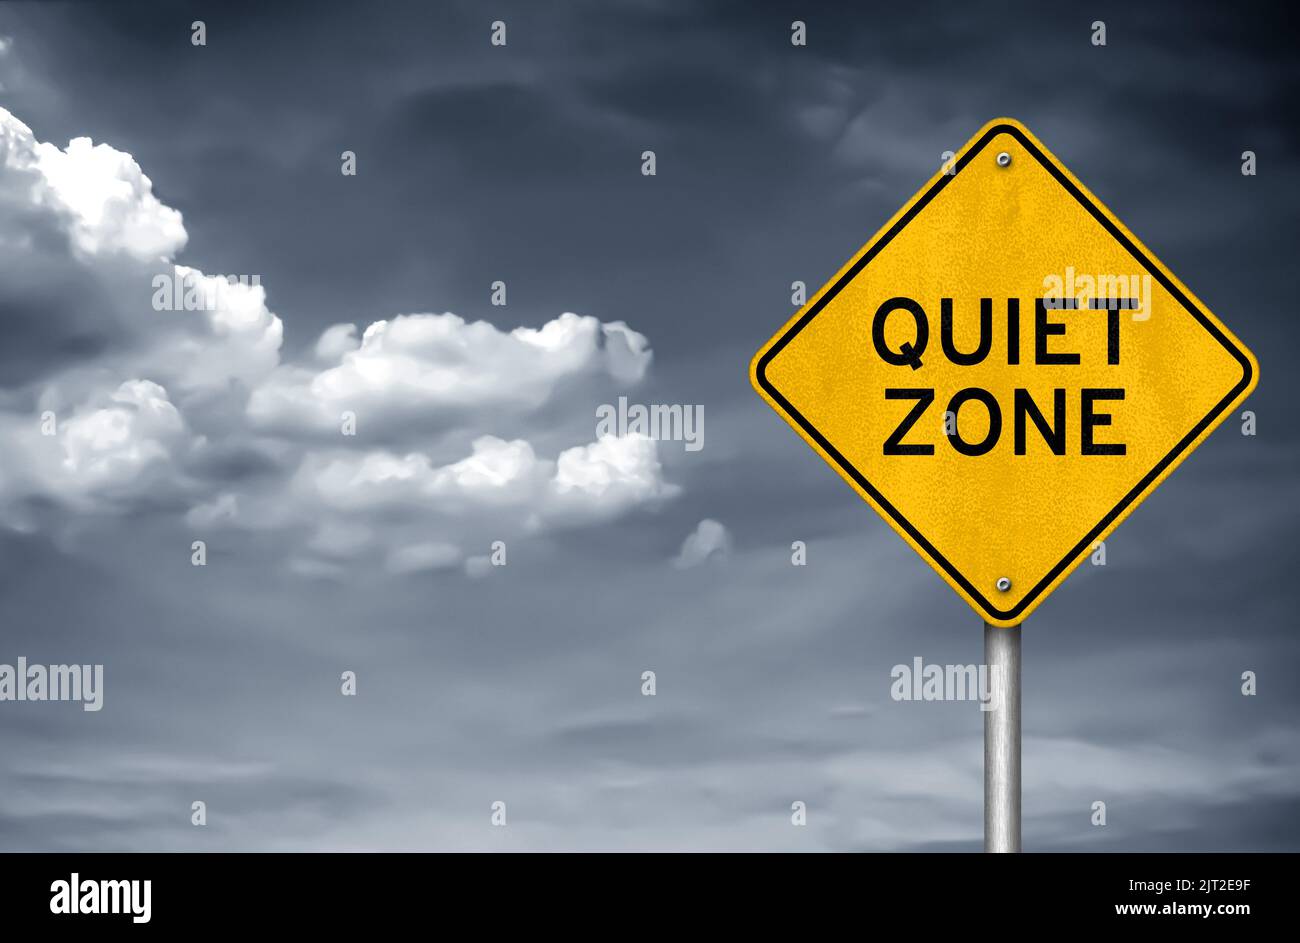 Quiet Zone - road sign warning Stock Photo